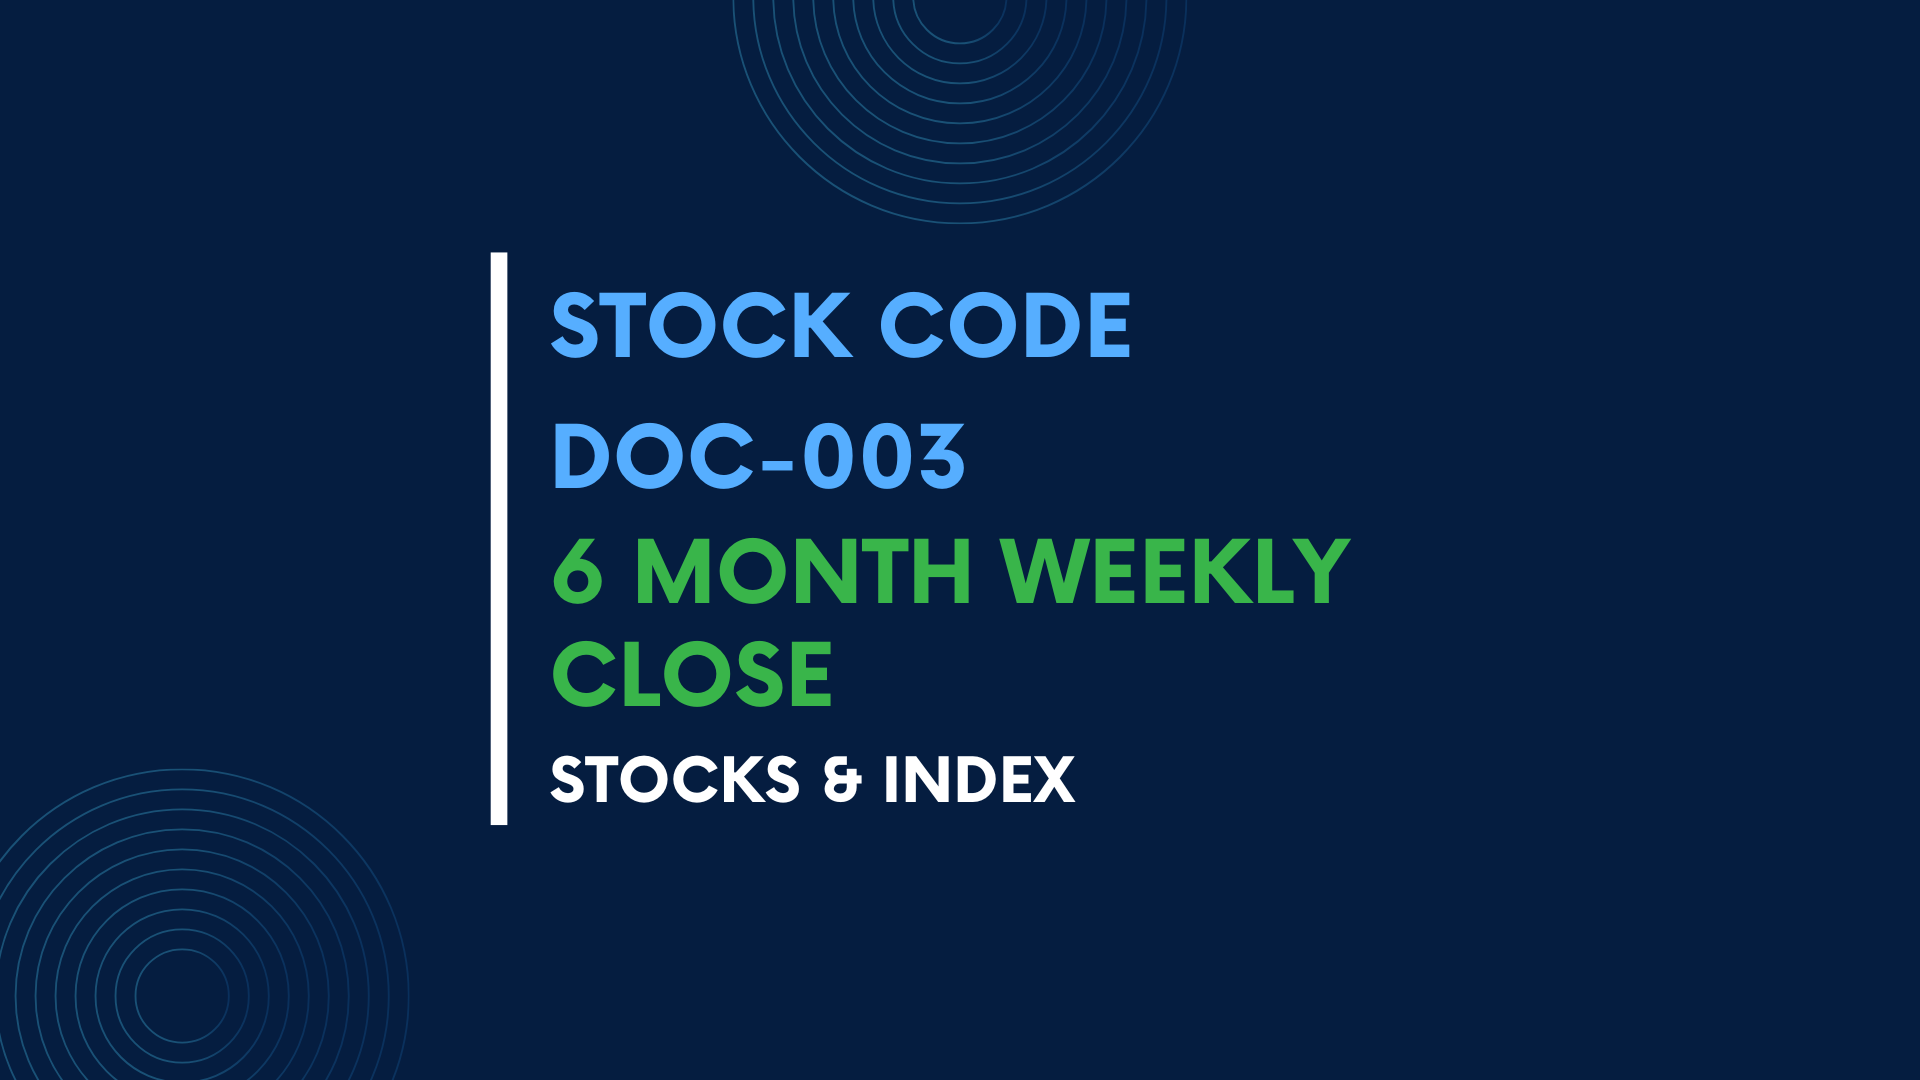 STOCK PRICE CHANGE WEEKLY